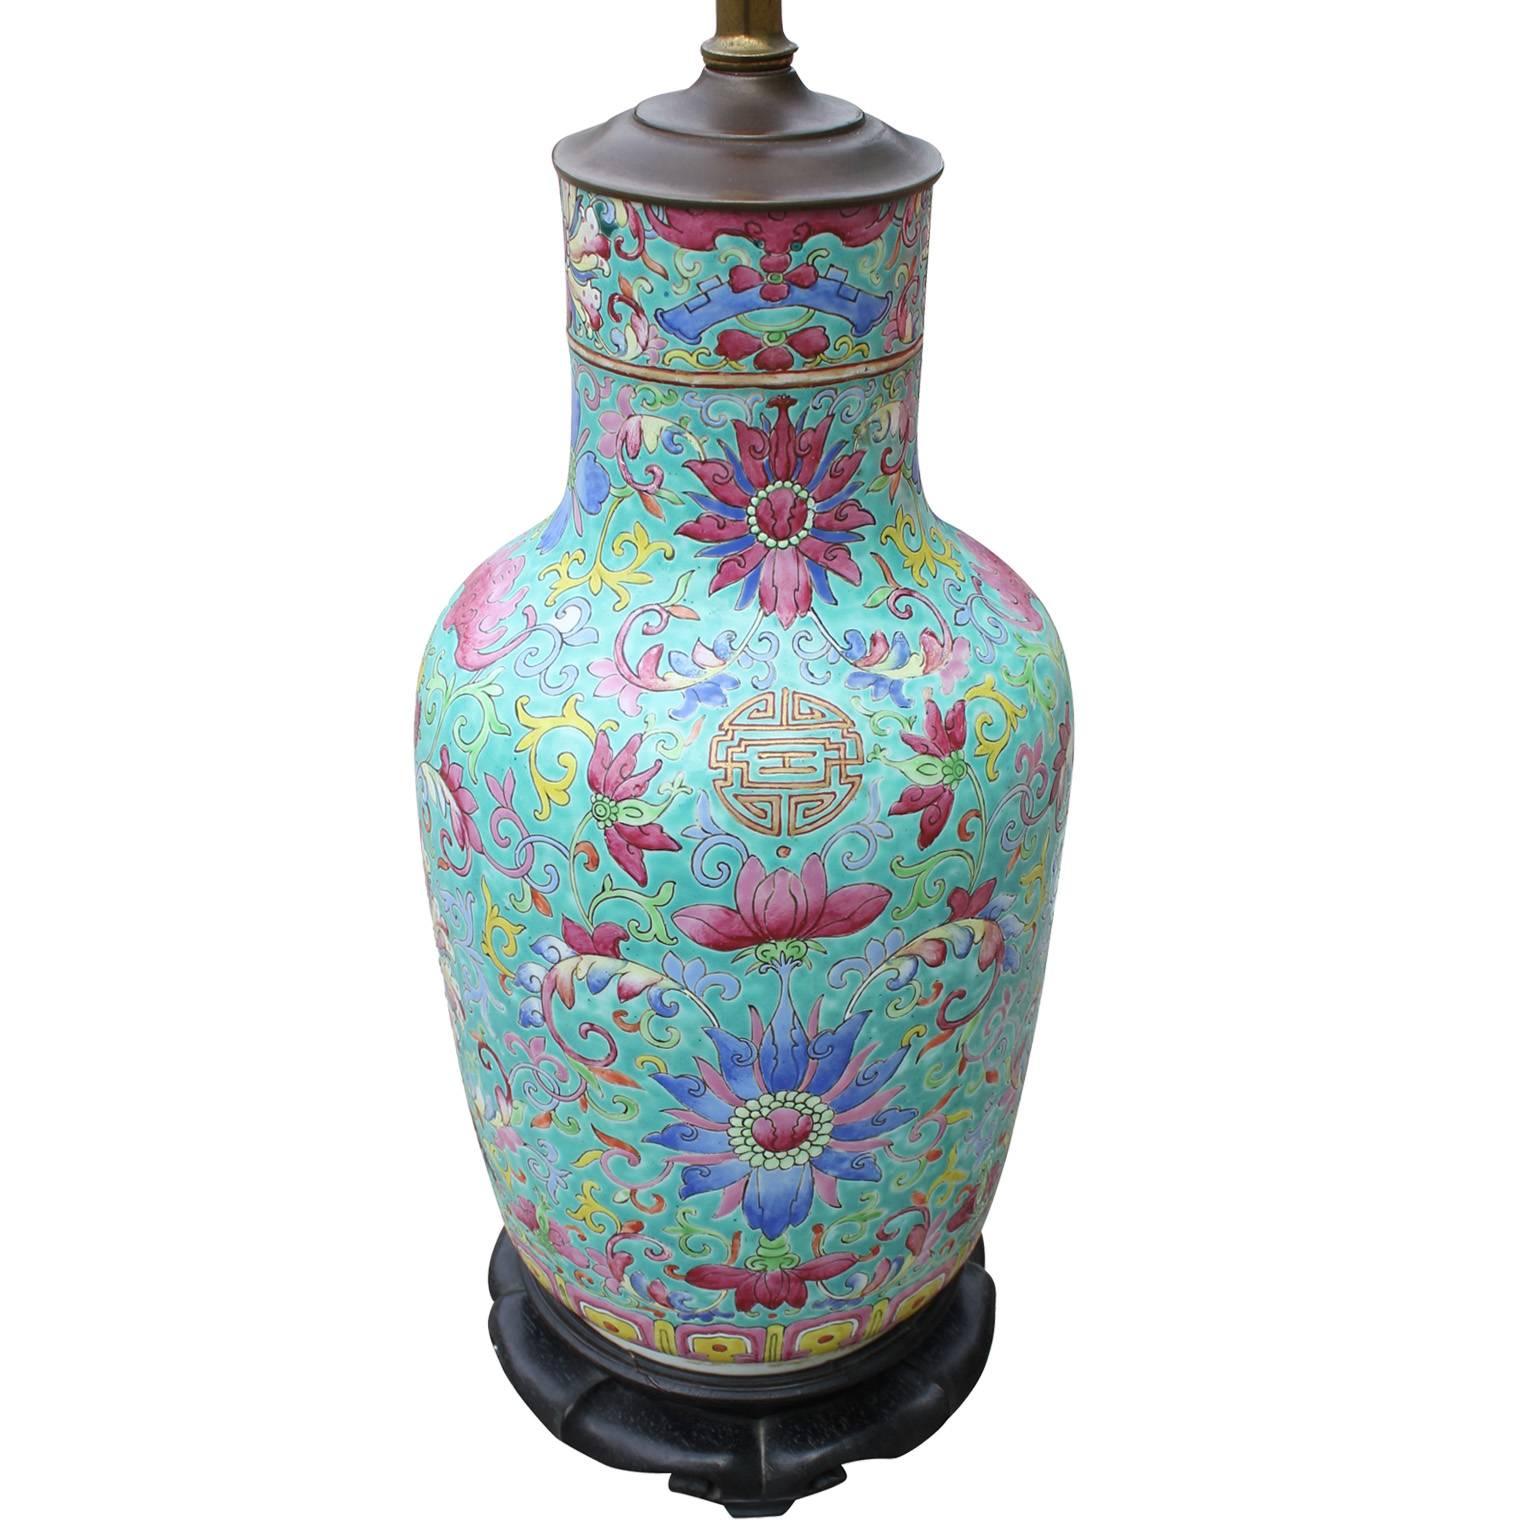 19th century Chinese vase wired as a lamp on a vintage base. Lamp is exceptional with vivid shades of turquoise, pink, blue, and yellow. Decorated with an intricate floral motif. 